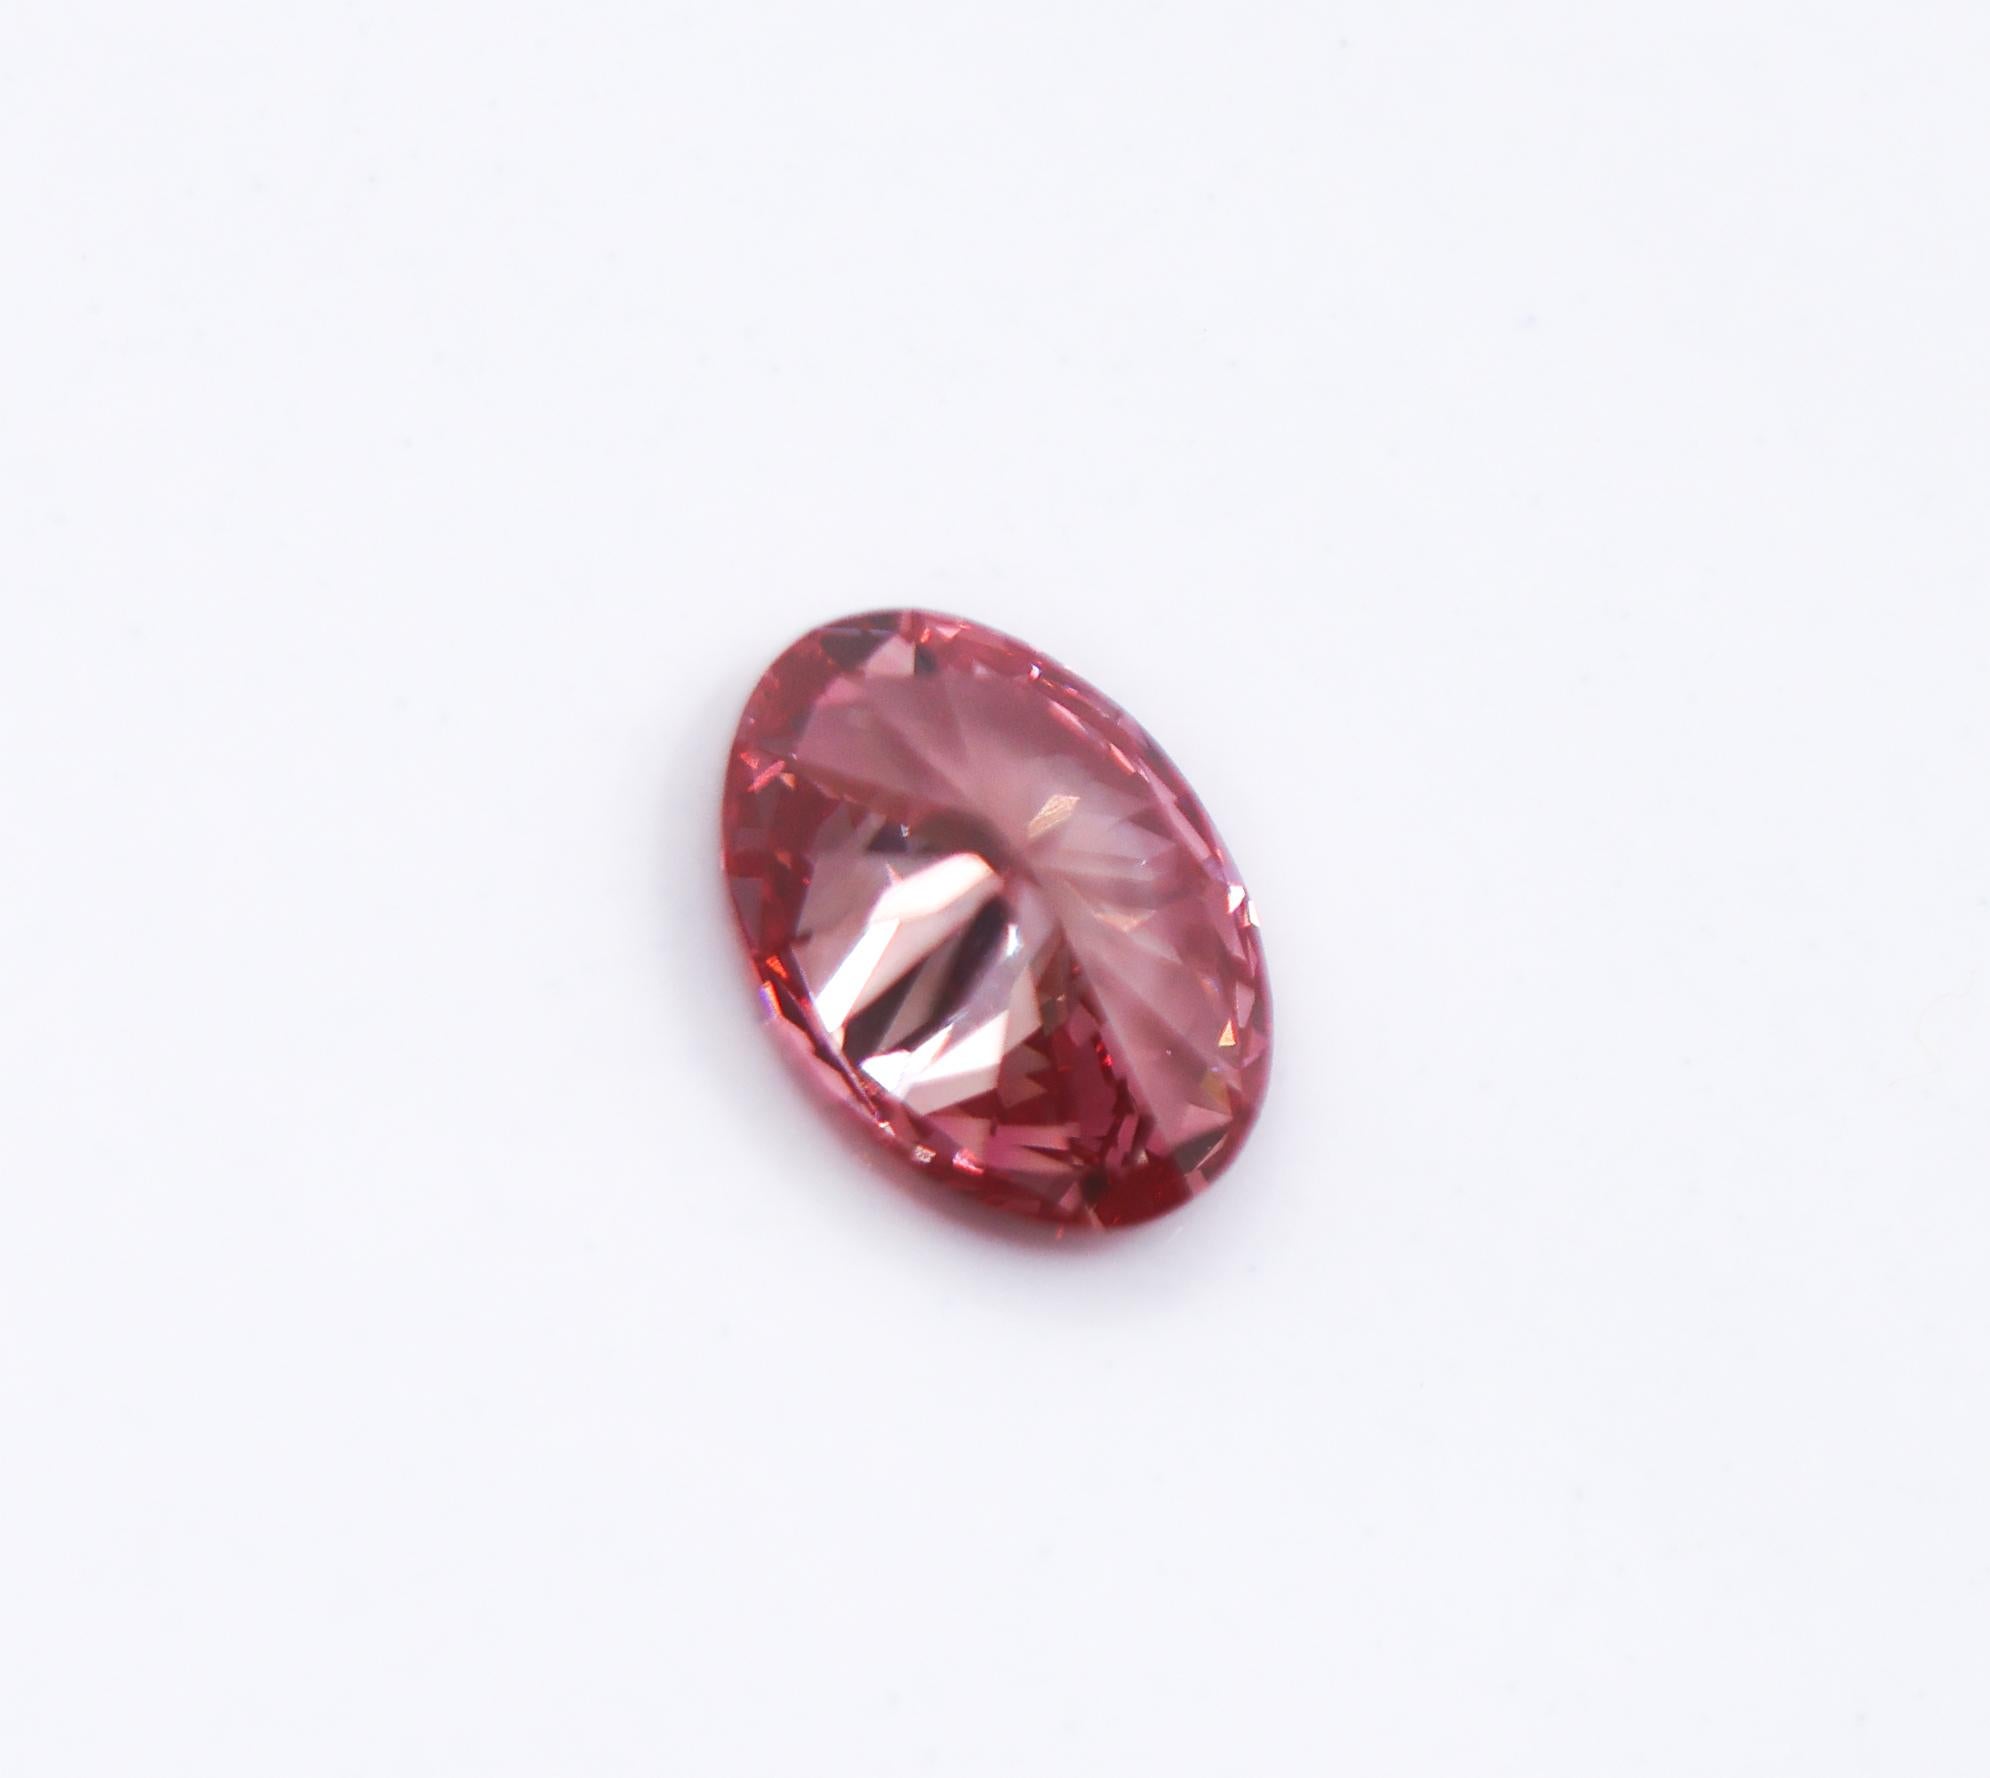 Brilliant Cut GIA Certified 1.58 Carat Fancy Vivid Pink Diamond Natural Earth Mined For Sale